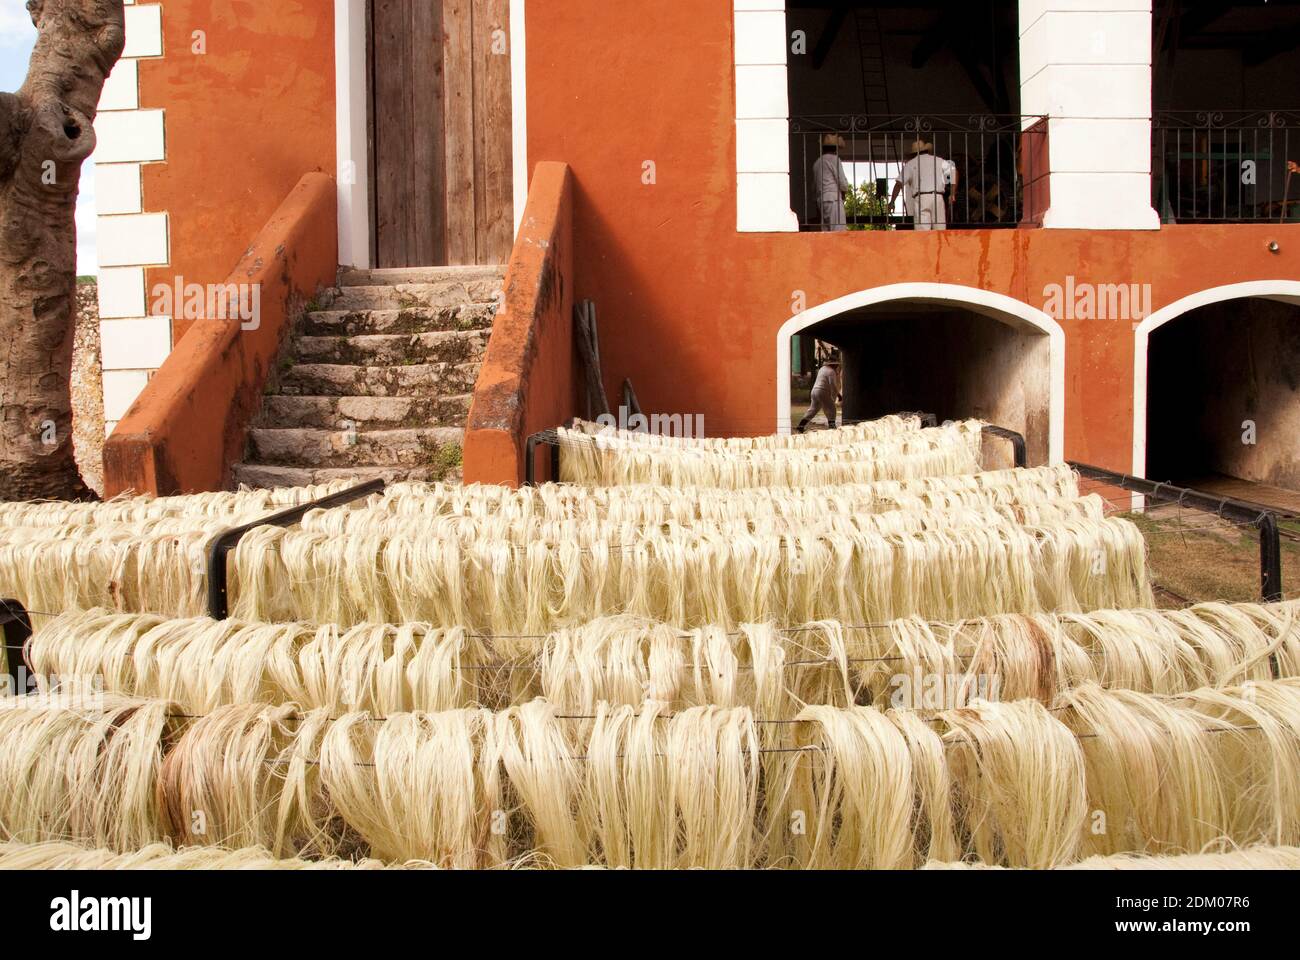 Workers process Henequen, an agave plant, into a fiber suitable for rope and twine, at the Hacienda Sotuta de Peon, Yucatan, Mexico. Stock Photo